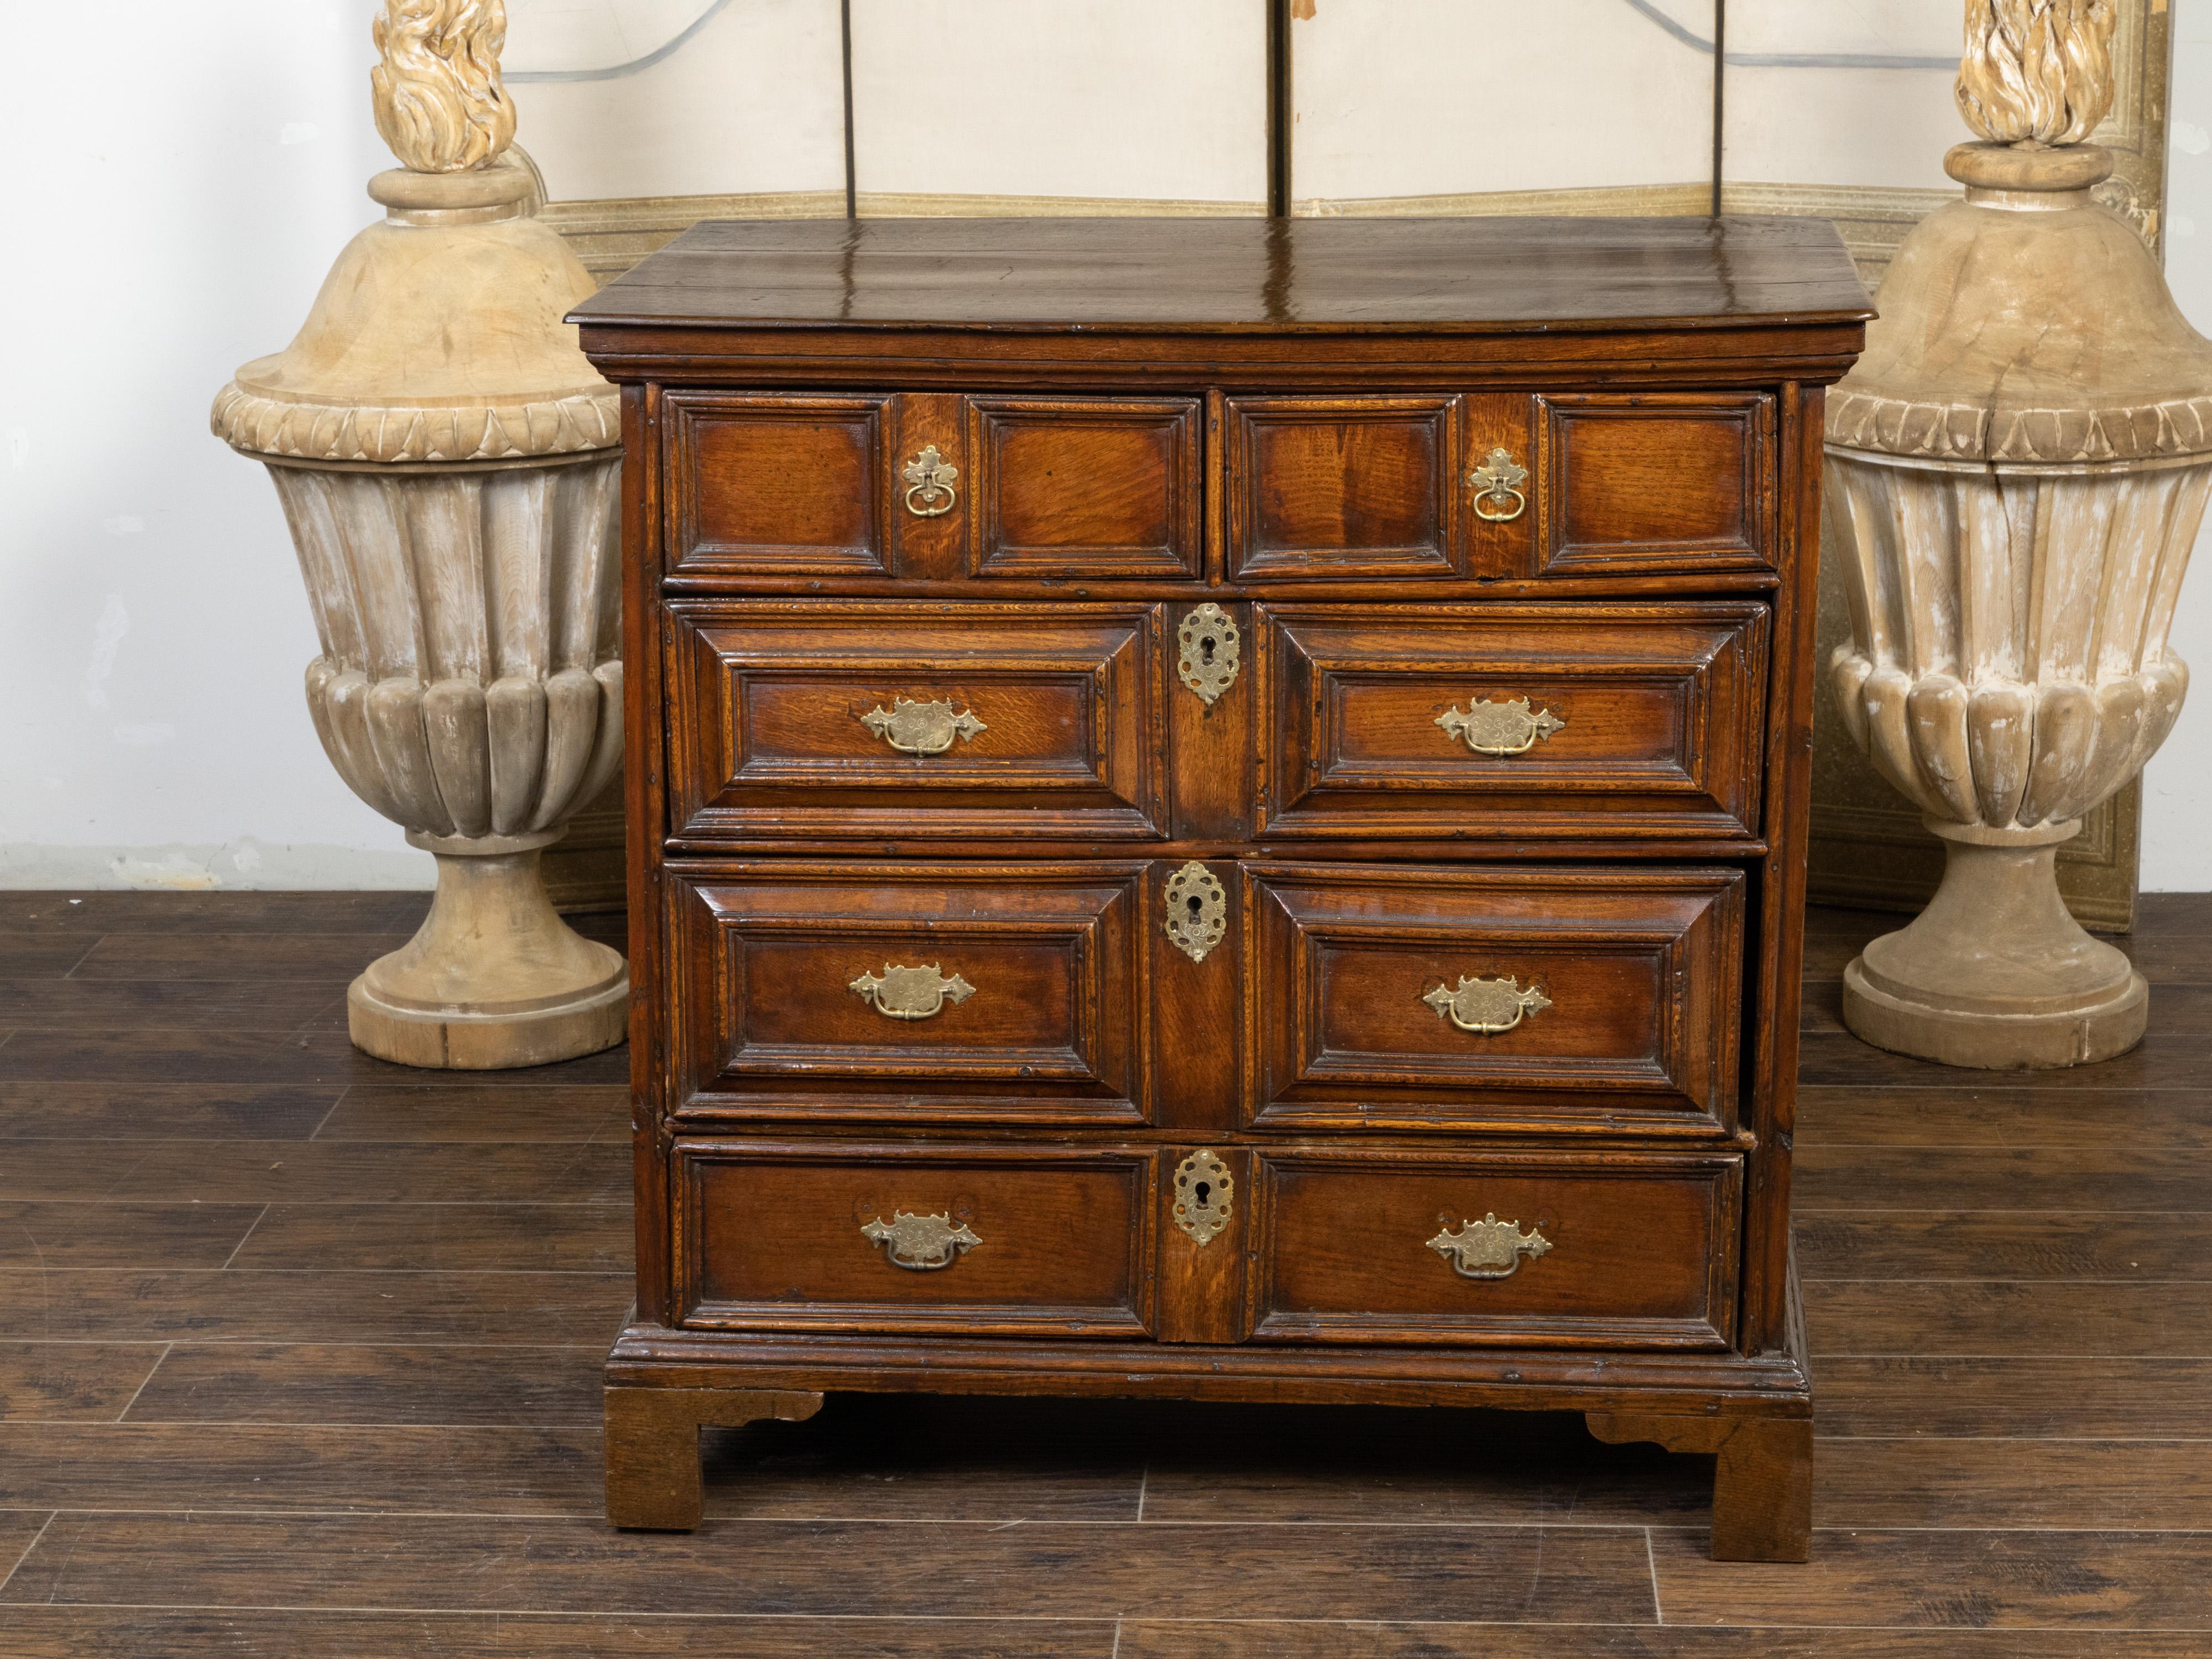 An English George III period oak geometric front chest from the early 19th century, with five drawers, brass Chippendale style hardware and bracket feet. Created in England during the first quarter of the 19th century, this George III period oak